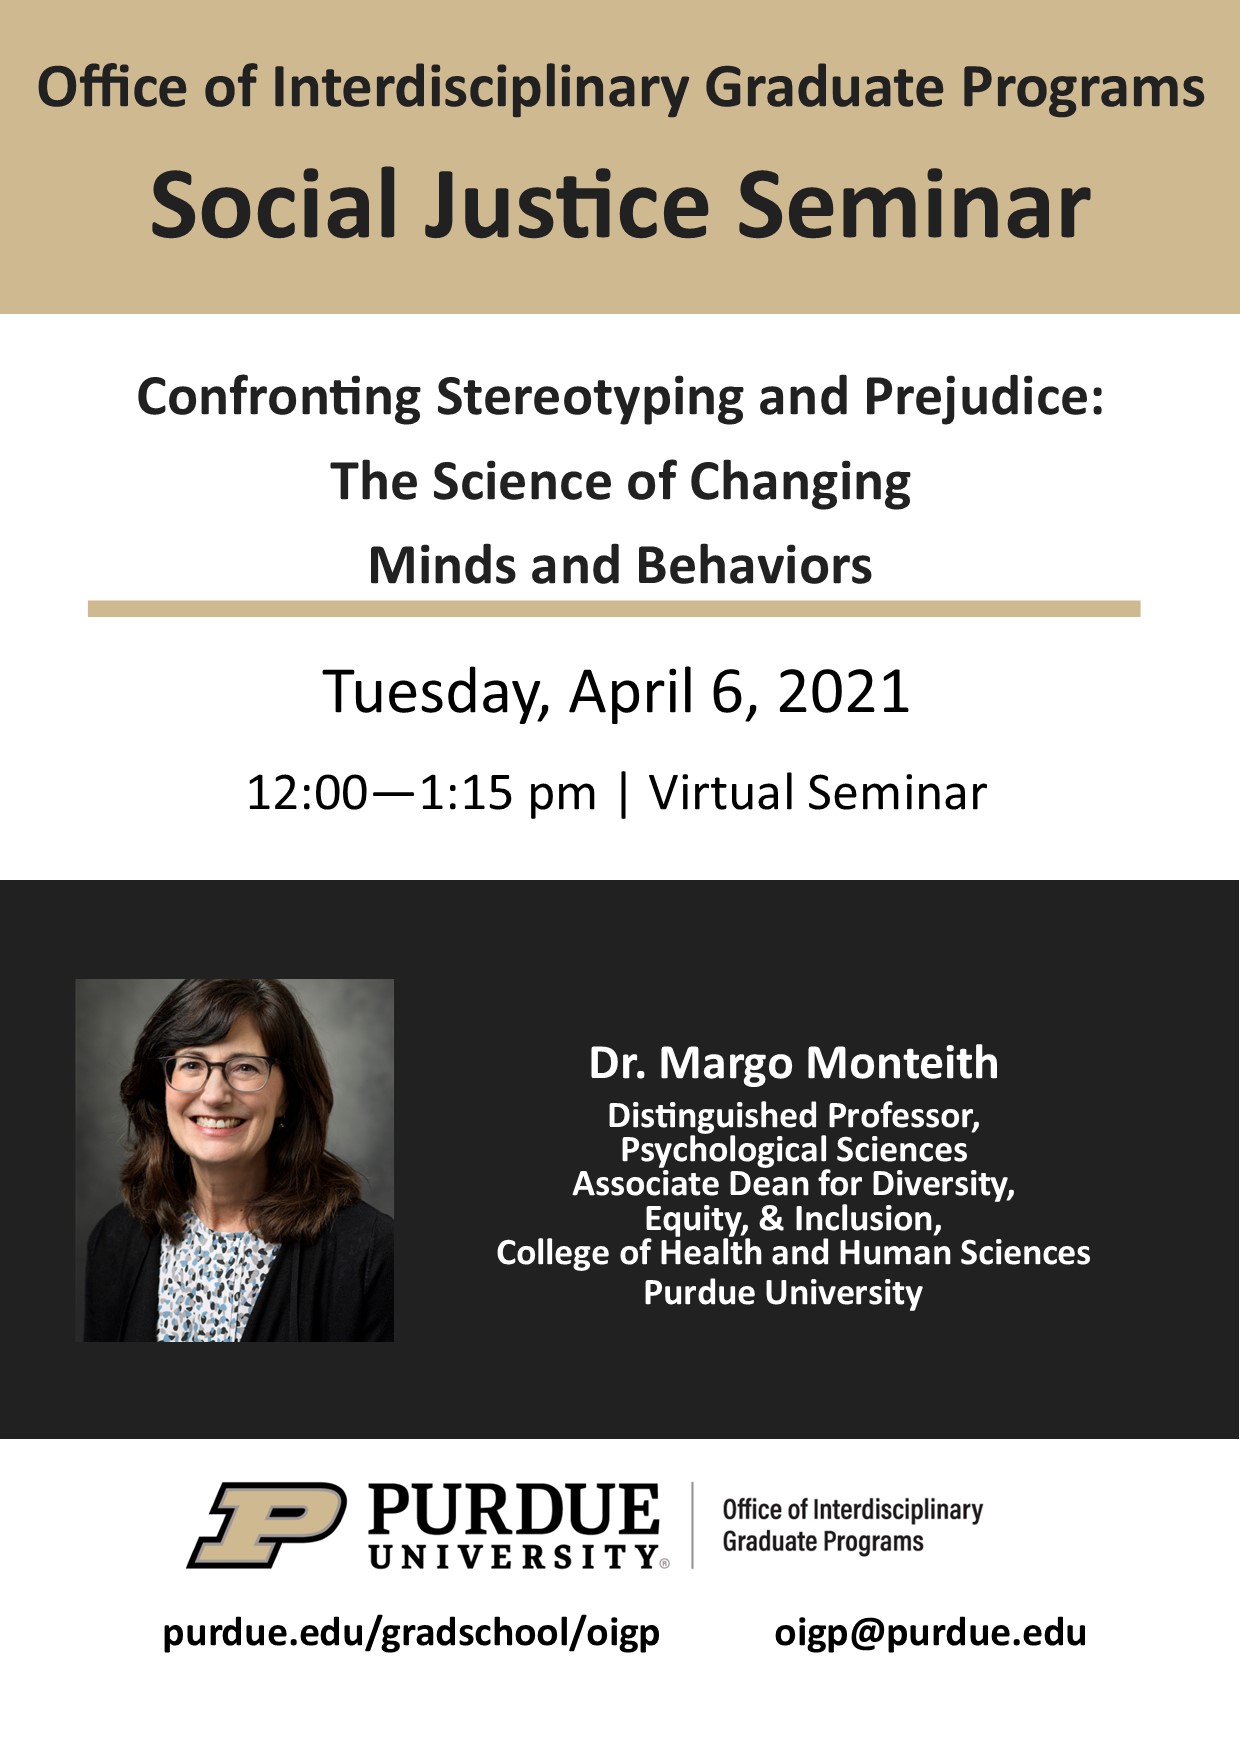 Flyer for Confronting Stereotyping and Prejudice: The Science of Changing Minds and Behaviors